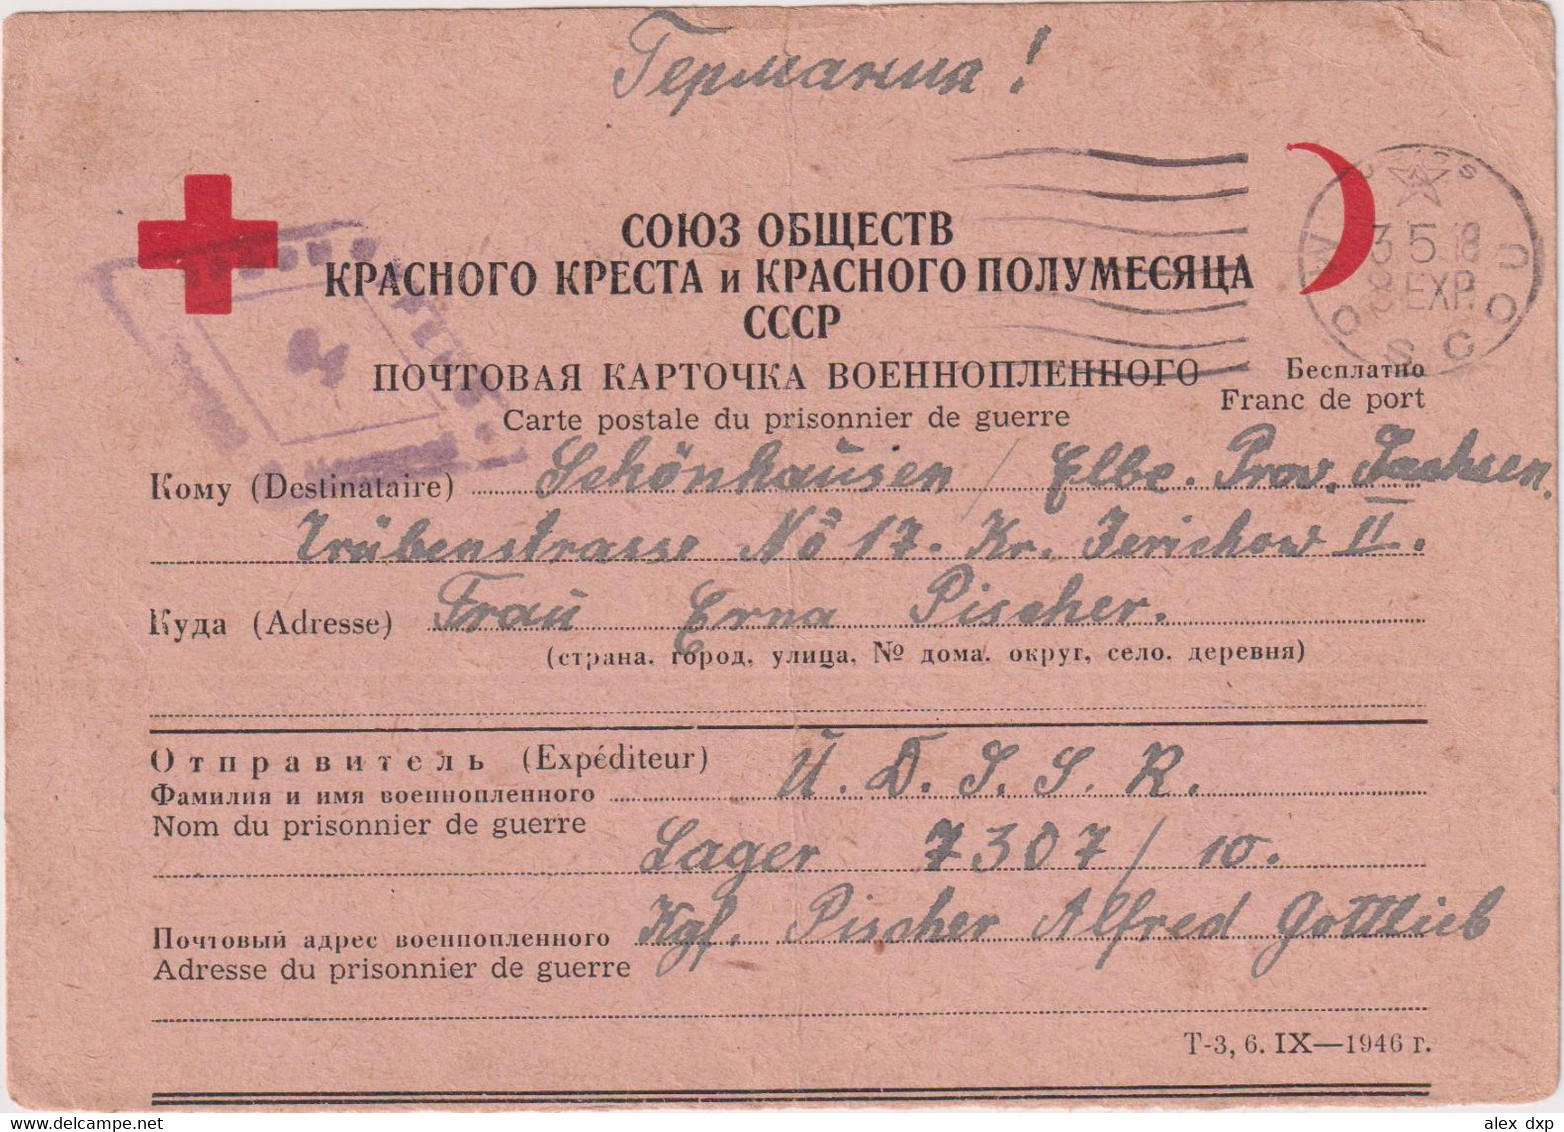 RUSSIA (USSR) > 1948 POSTAL HISTORY > POW RED CROSS CARD FROM POW CAMP 7307/10 TO SCHOHAUSEN, GERMANY - Brieven En Documenten